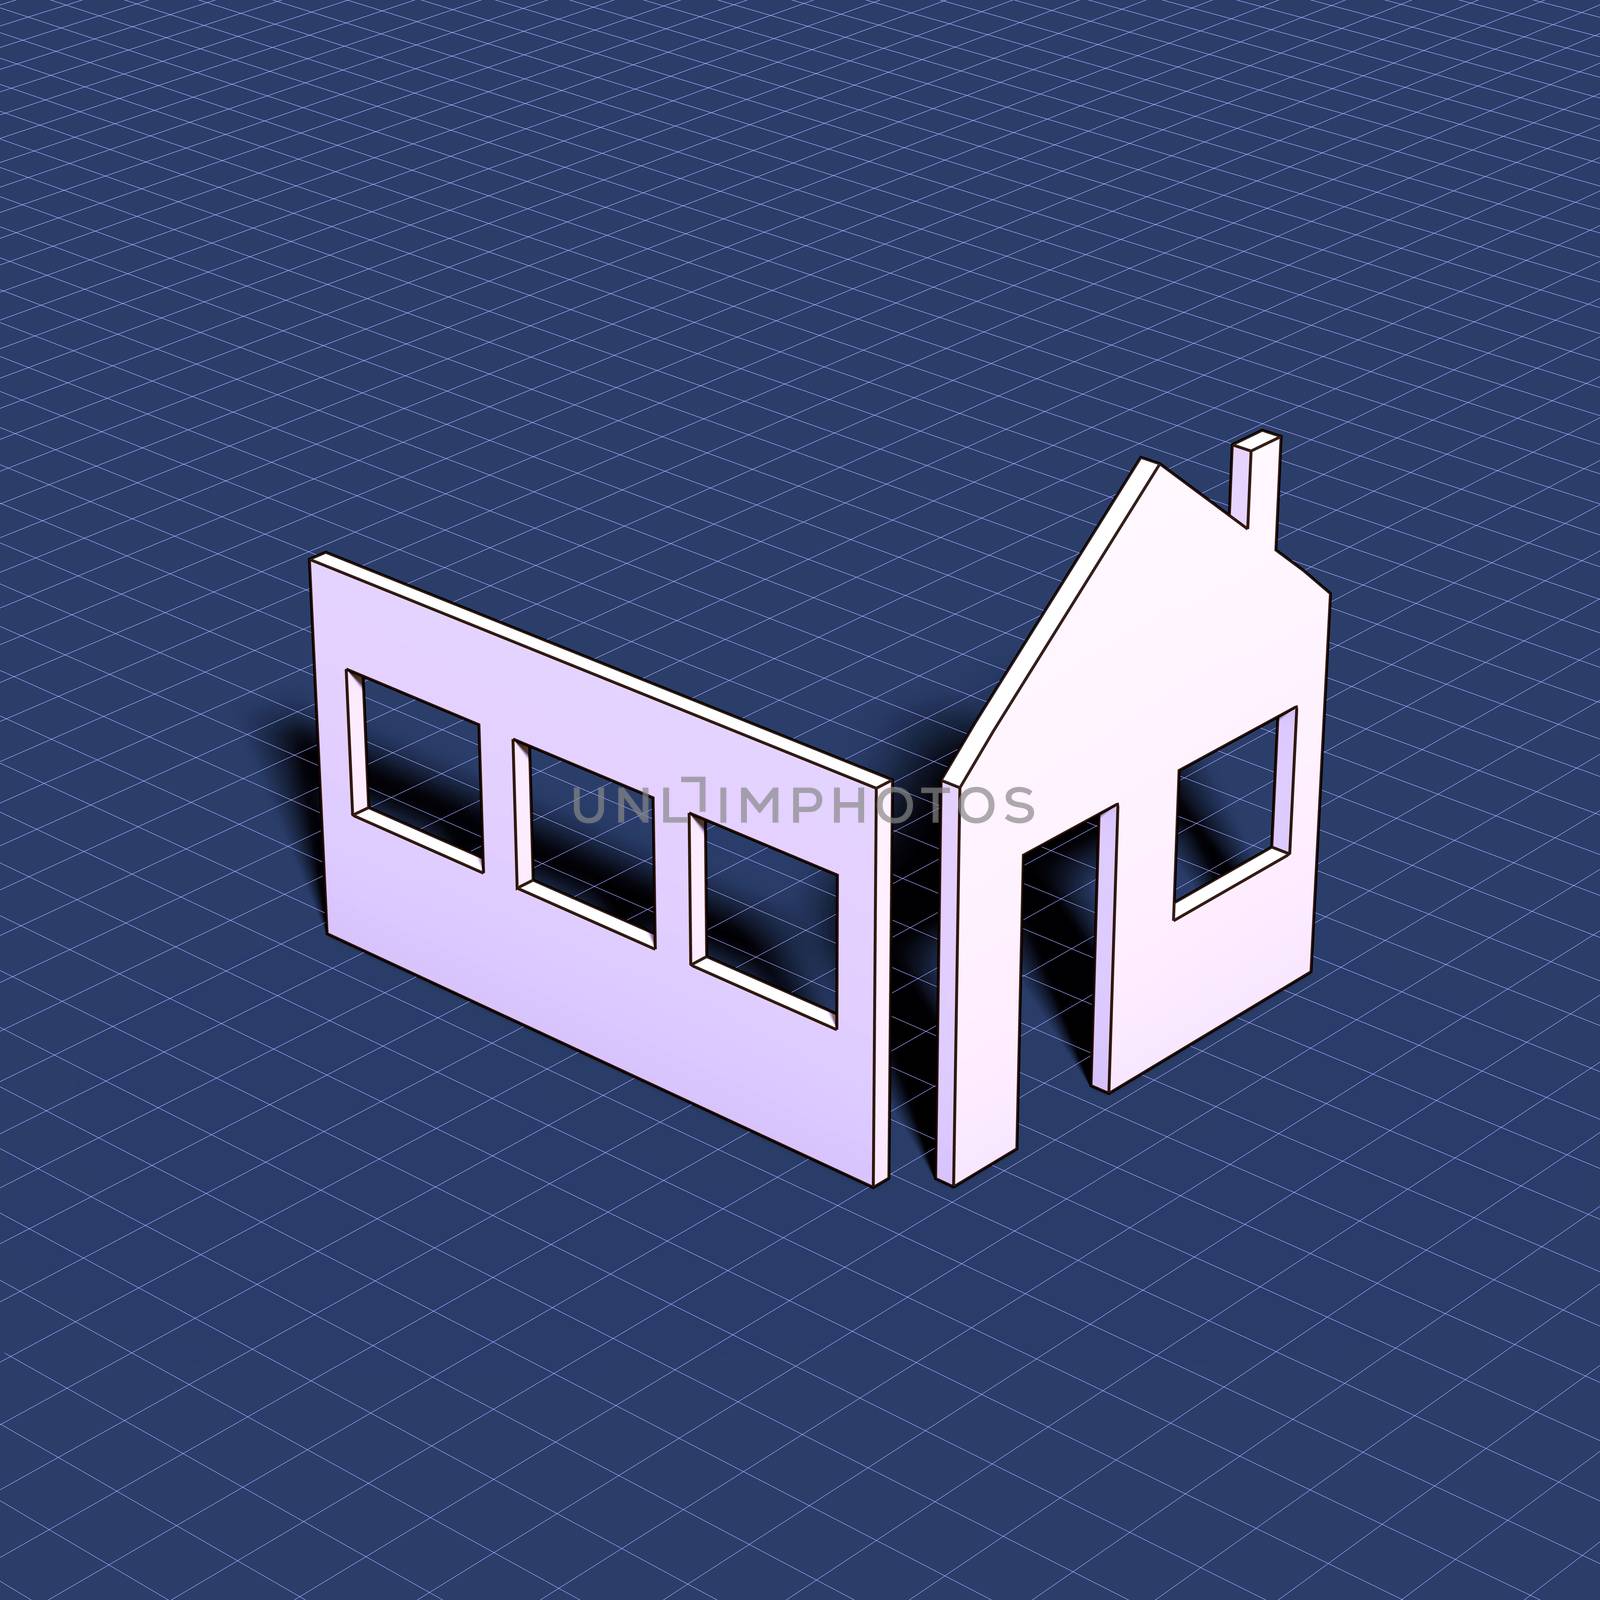 Home. Element of blueprint drawing in shape of house sign. 3D illustration